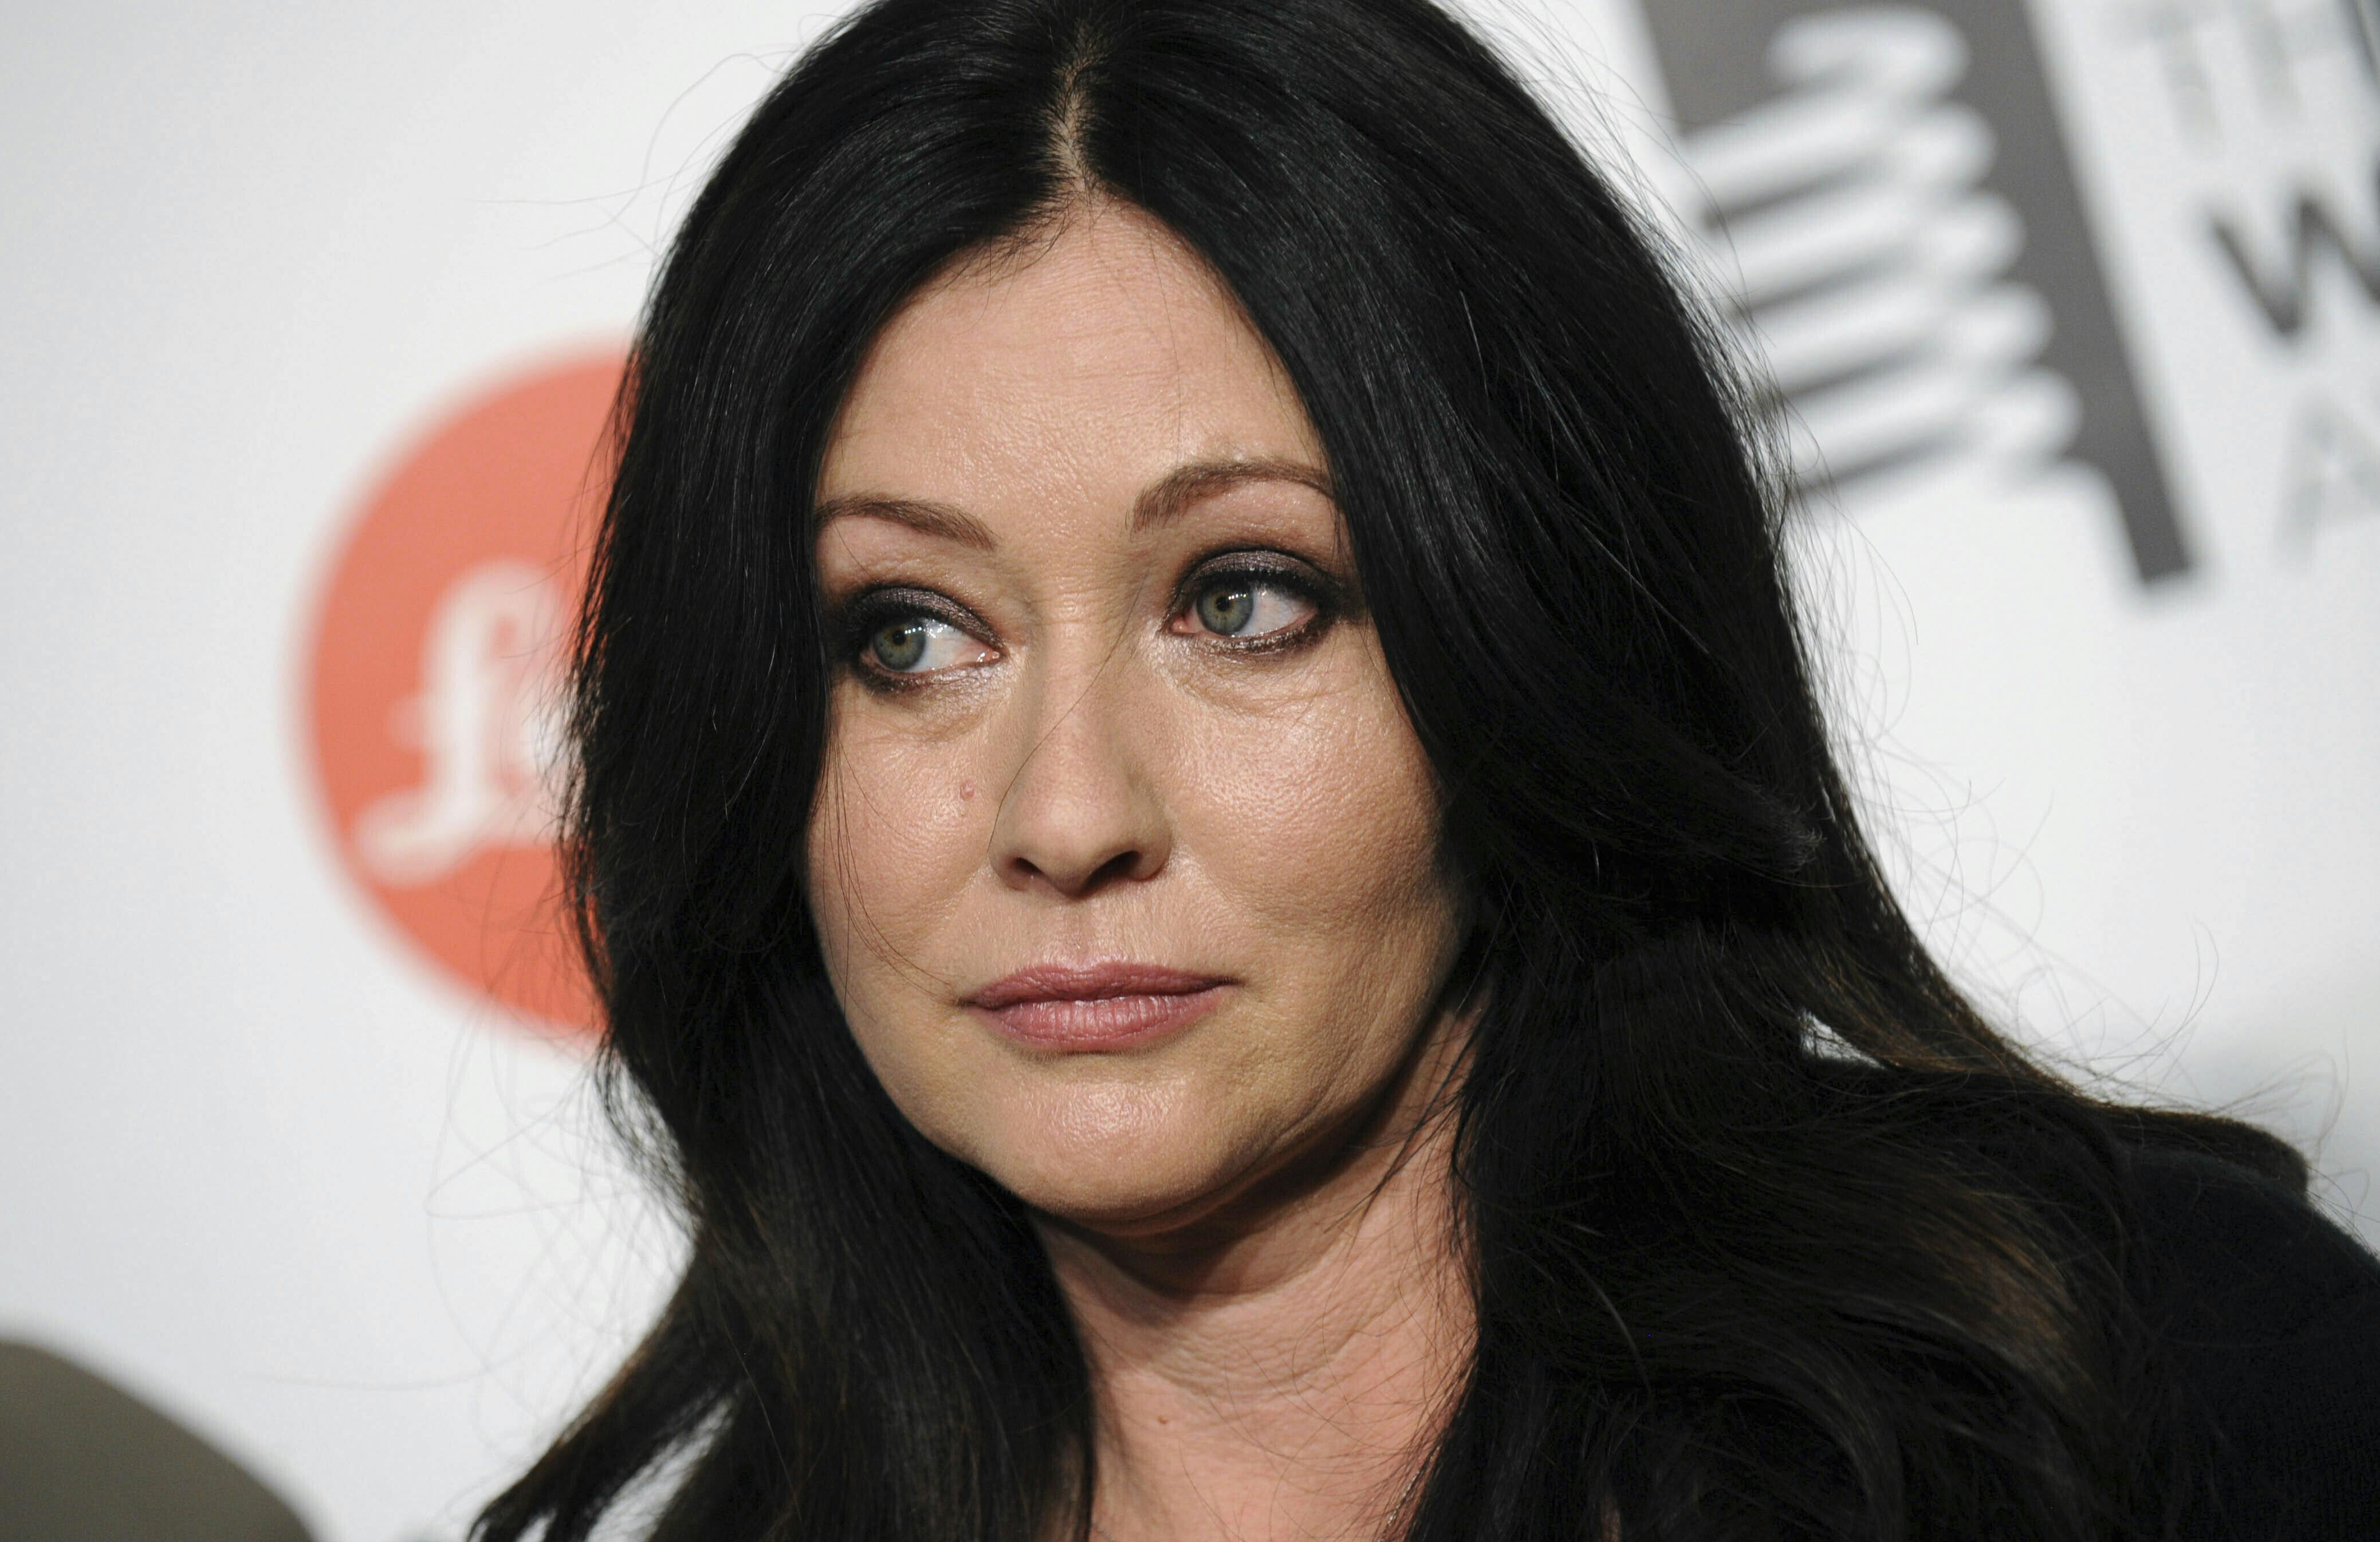 Photo by: Dennis Van Tine/STAR MAX/IPx 2020 2/4/20 Shannen Doherty reveals she has Stage 4 Cancer Diagnosis. STAR MAX File Photo: 5/19/14 Shannen Doherty at The 18th Annual Webby Awards. (NYC)